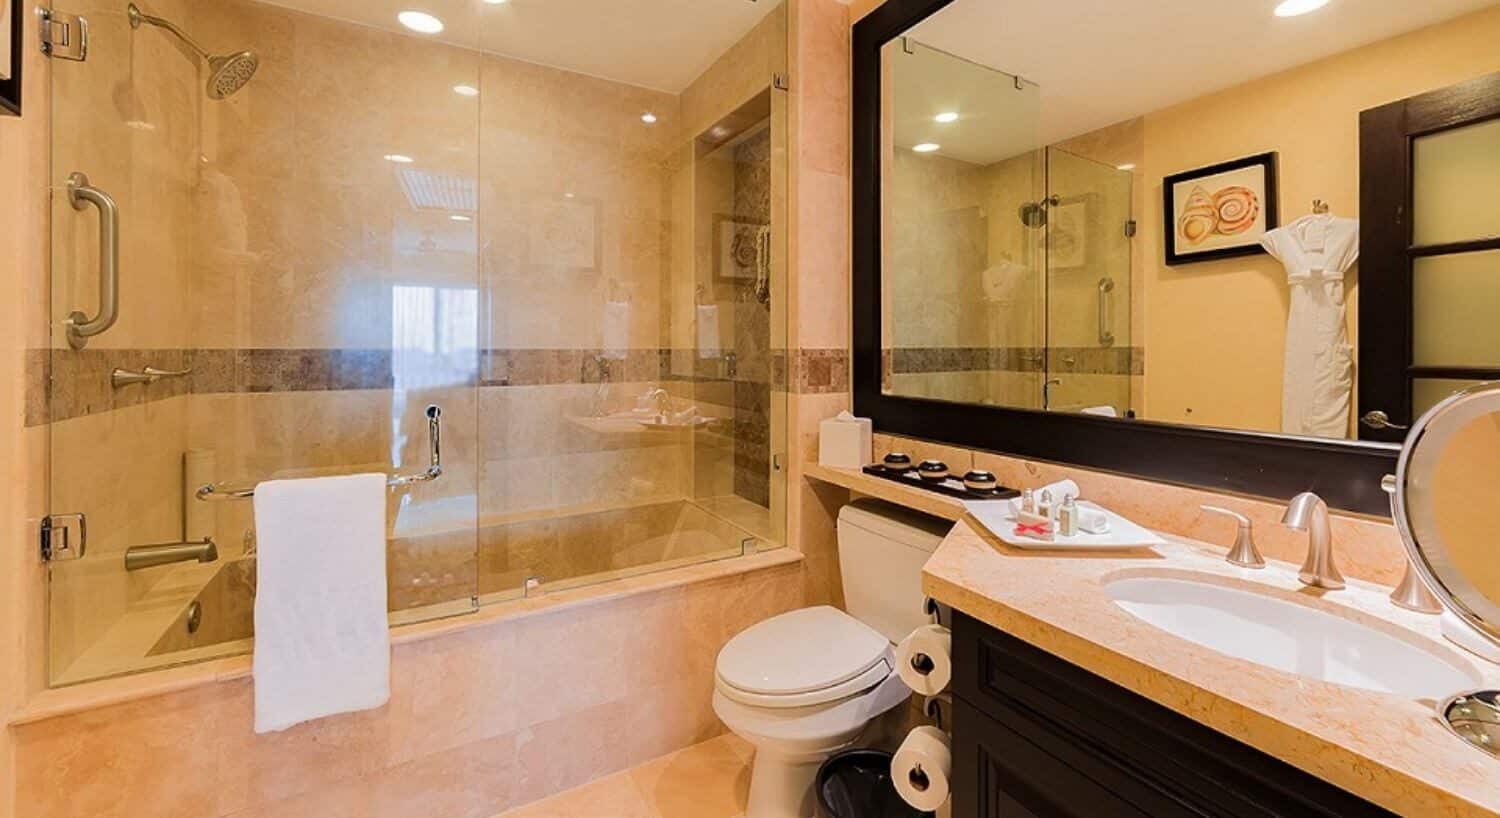 A bathroom with dark wood cupboard and marble countertop with sink, magniying mirror, bath amenities, a large mirror above, a toilet, and a large bathtub and shower with glass doors.